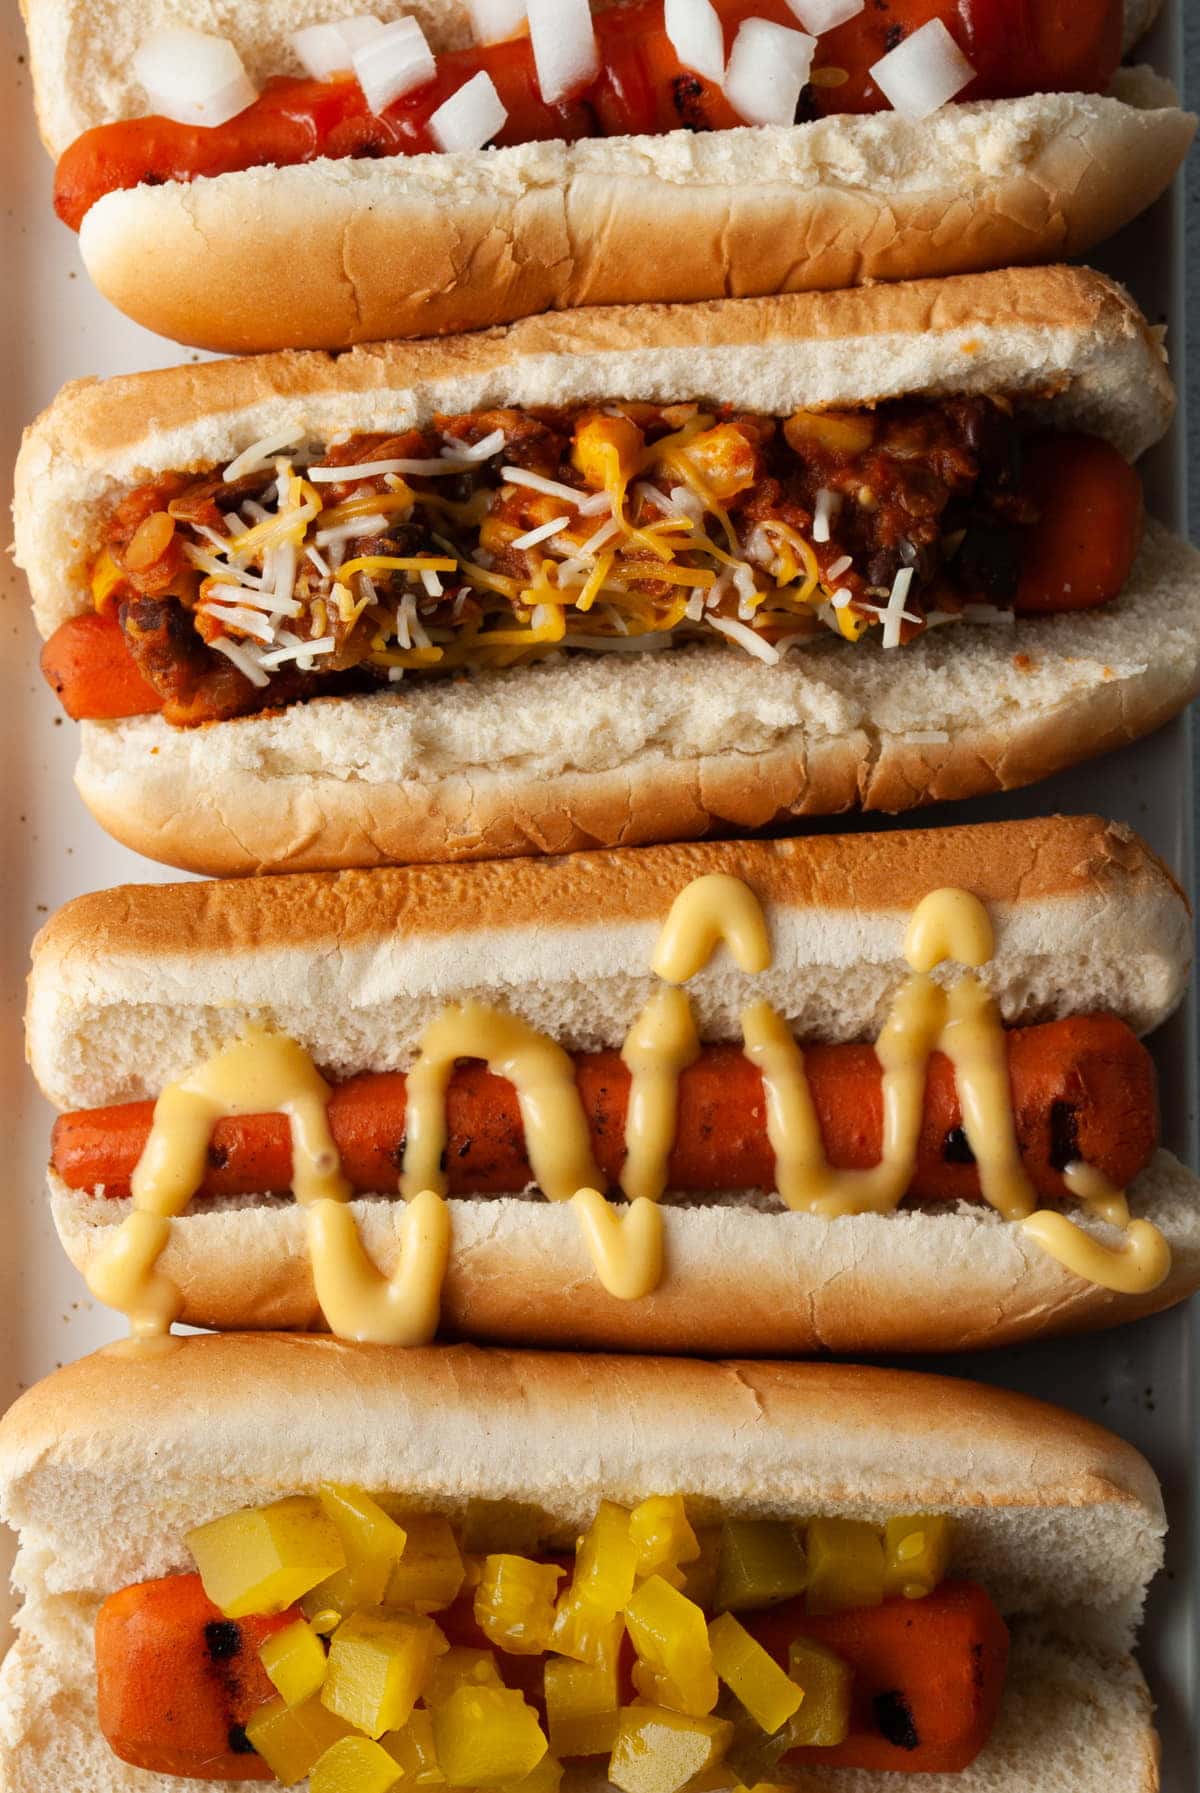 4 carrot dogs with 4 different toppings